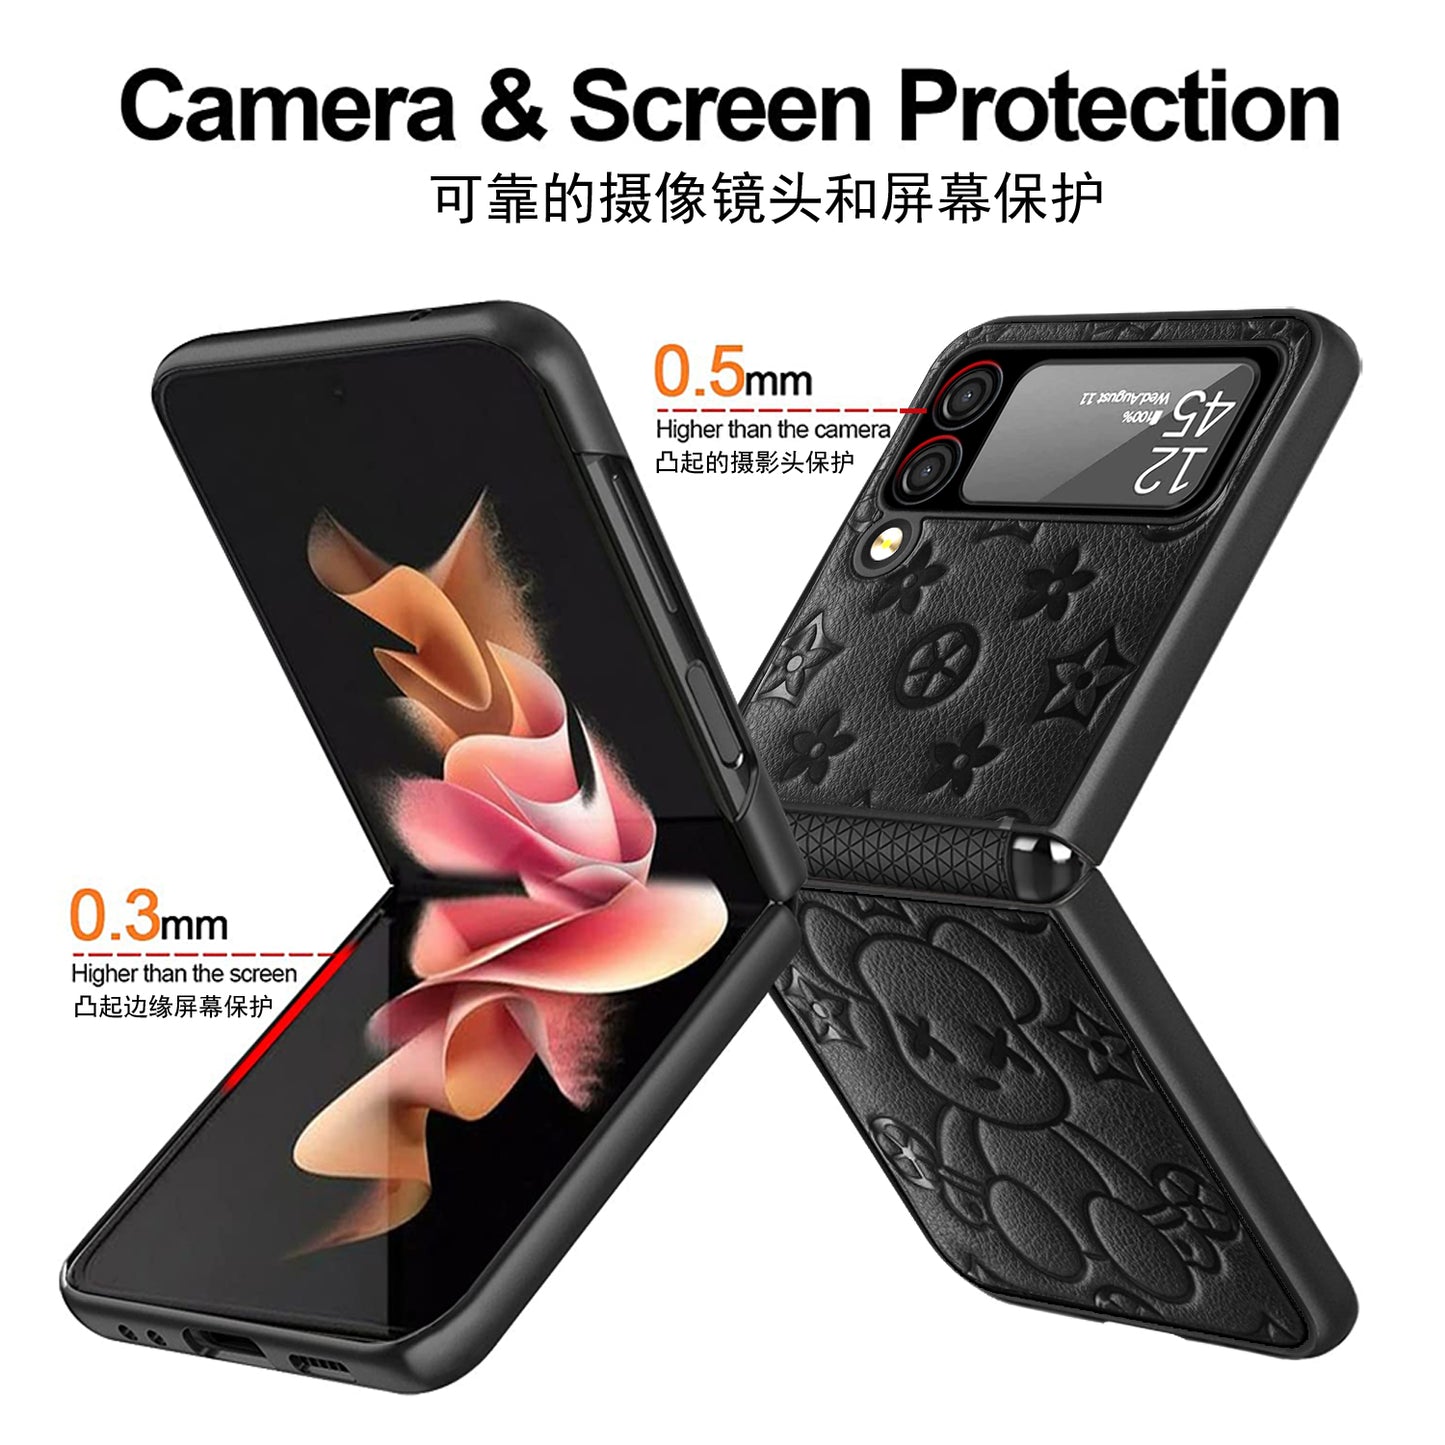 High Quality Leather Full Protective Case For SAM Flip 4 Waterproof Colorful Cover For Samsung Flip 4 Shockproof Case